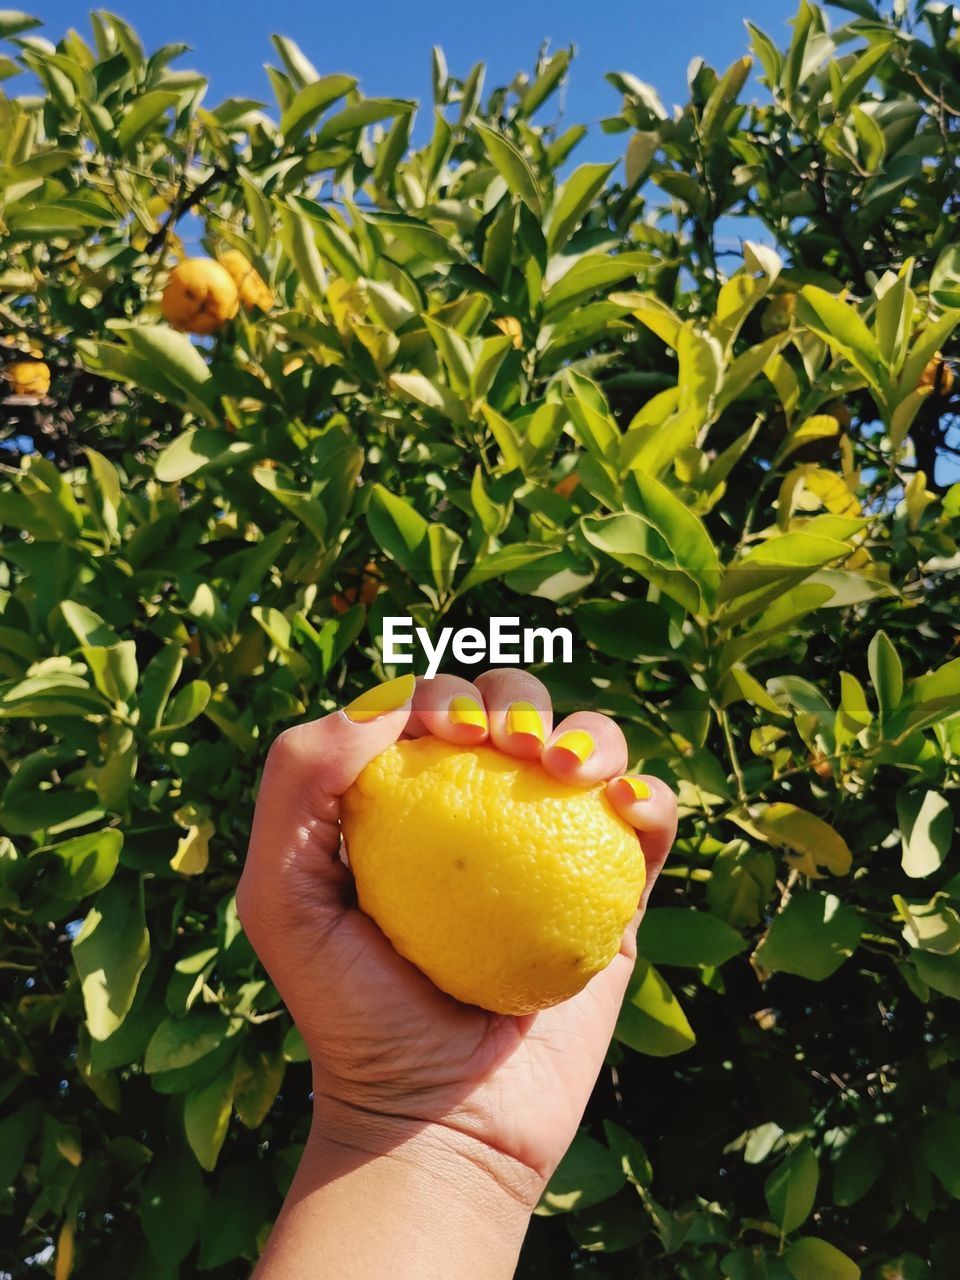 Midsection of person holding lemon on next to a lemon tree